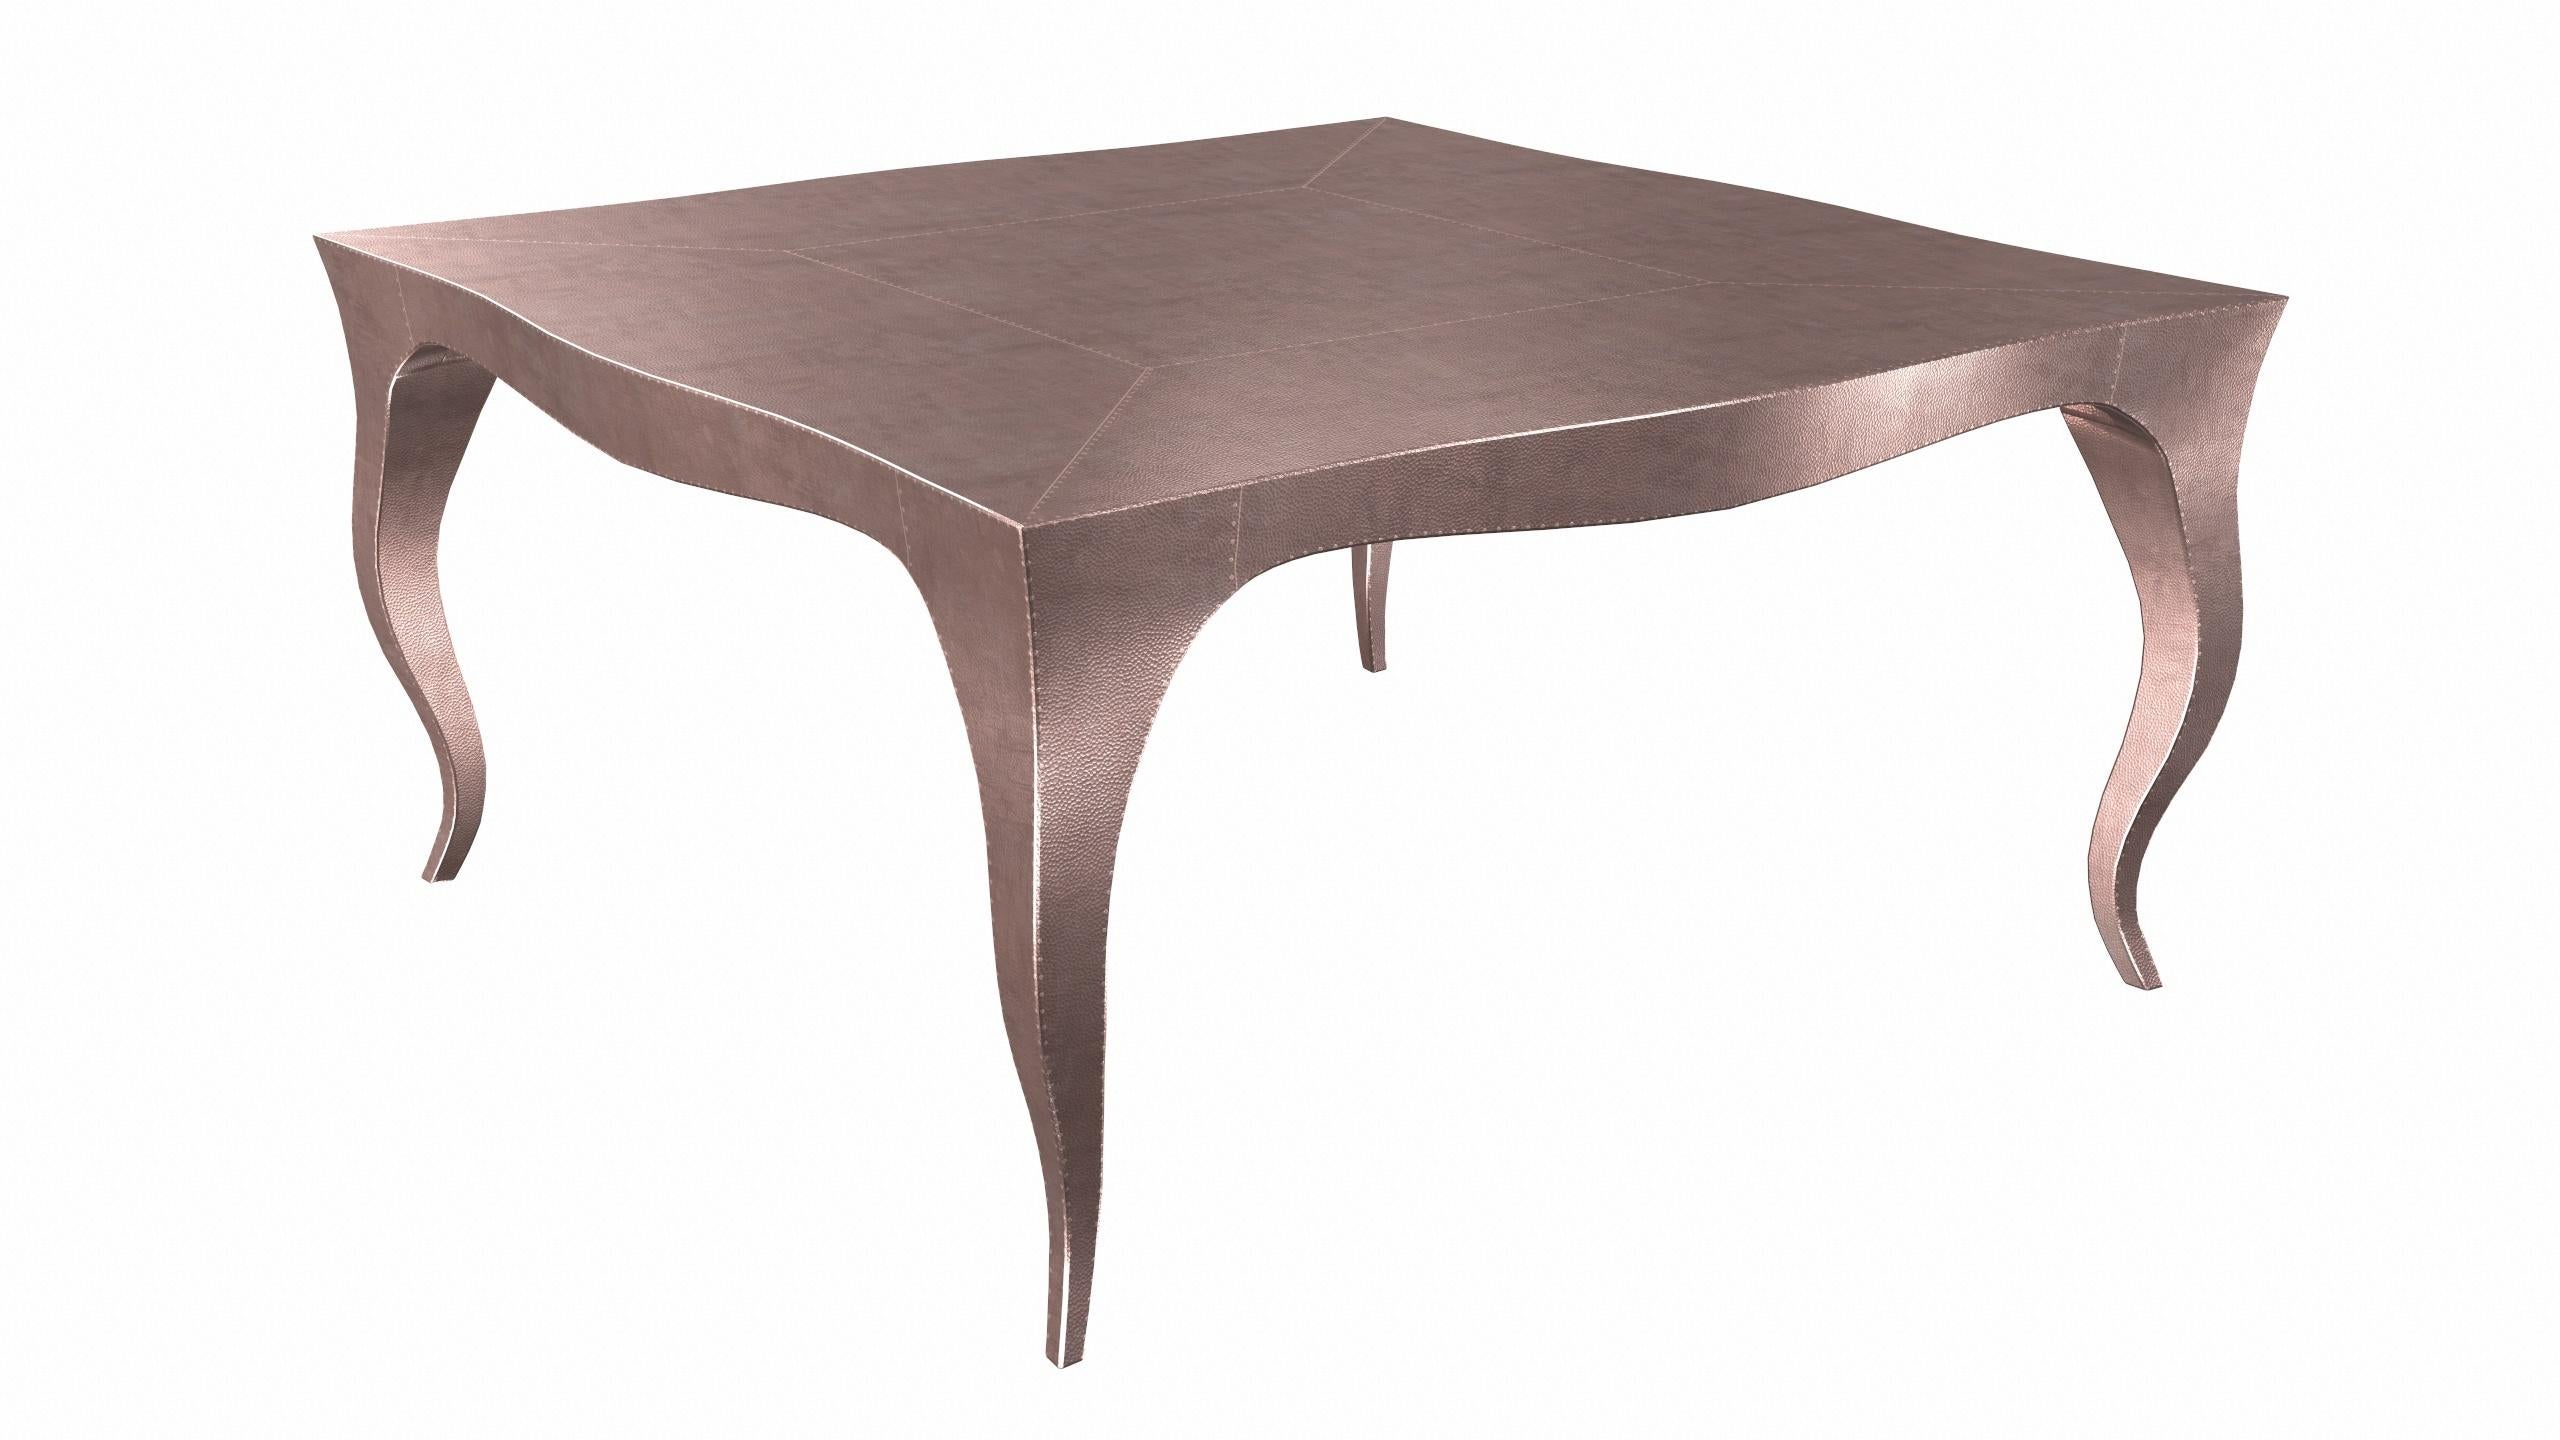 Woodwork Louise Art Deco Nesting Tables Mid. Hammered Copper 18.5x18.5x10 inch by Paul M. For Sale